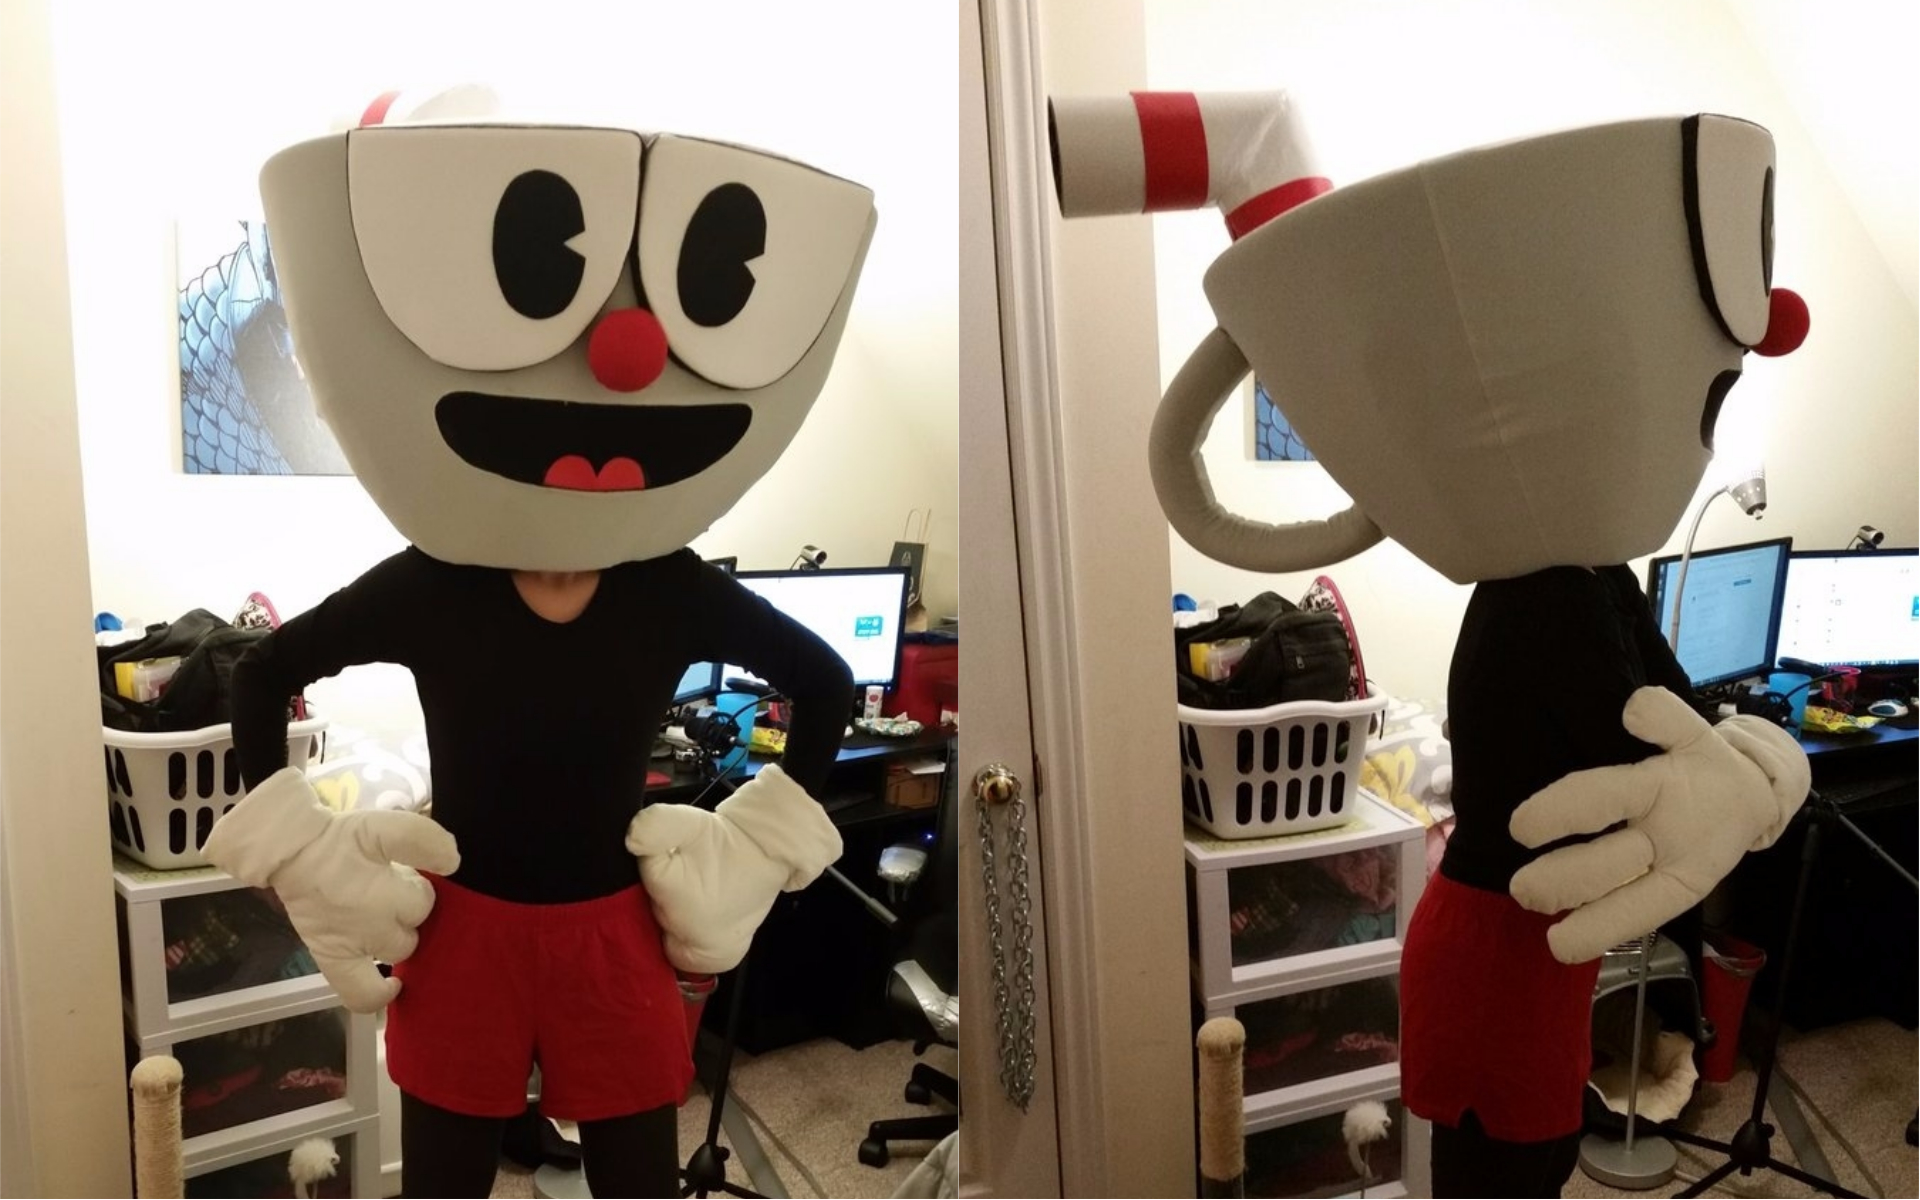 The Cuphead outfit